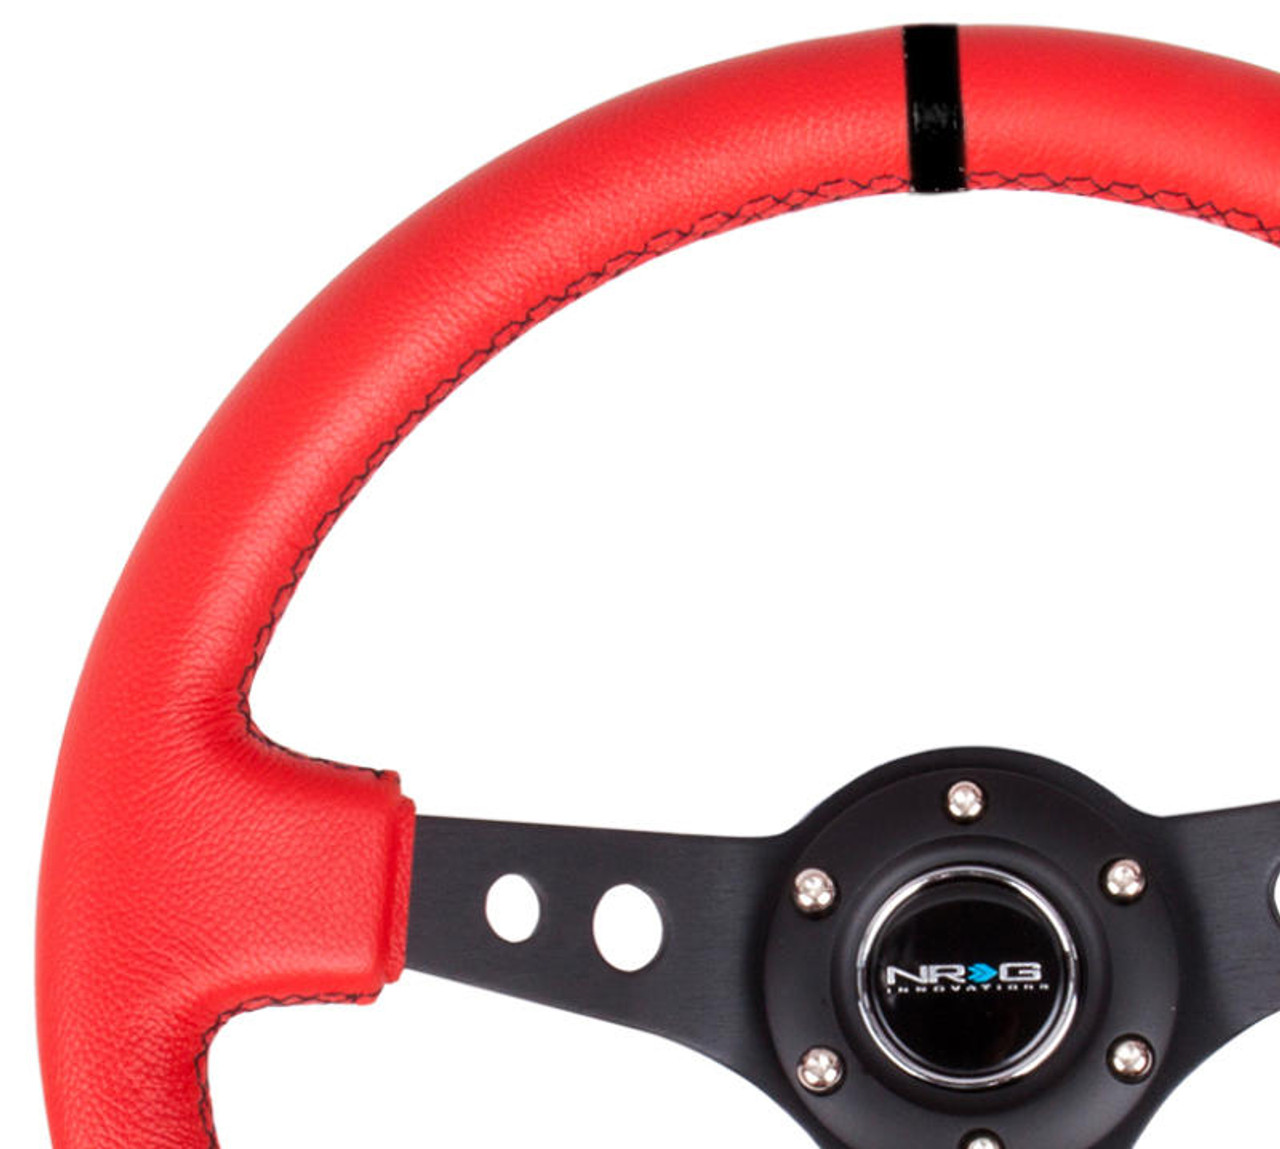 NRG NRG Reinforced Steering Wheel 350mm / 3in Deep Red Suede w/Blk Circle Cutout Spokes - RST-006S-RR